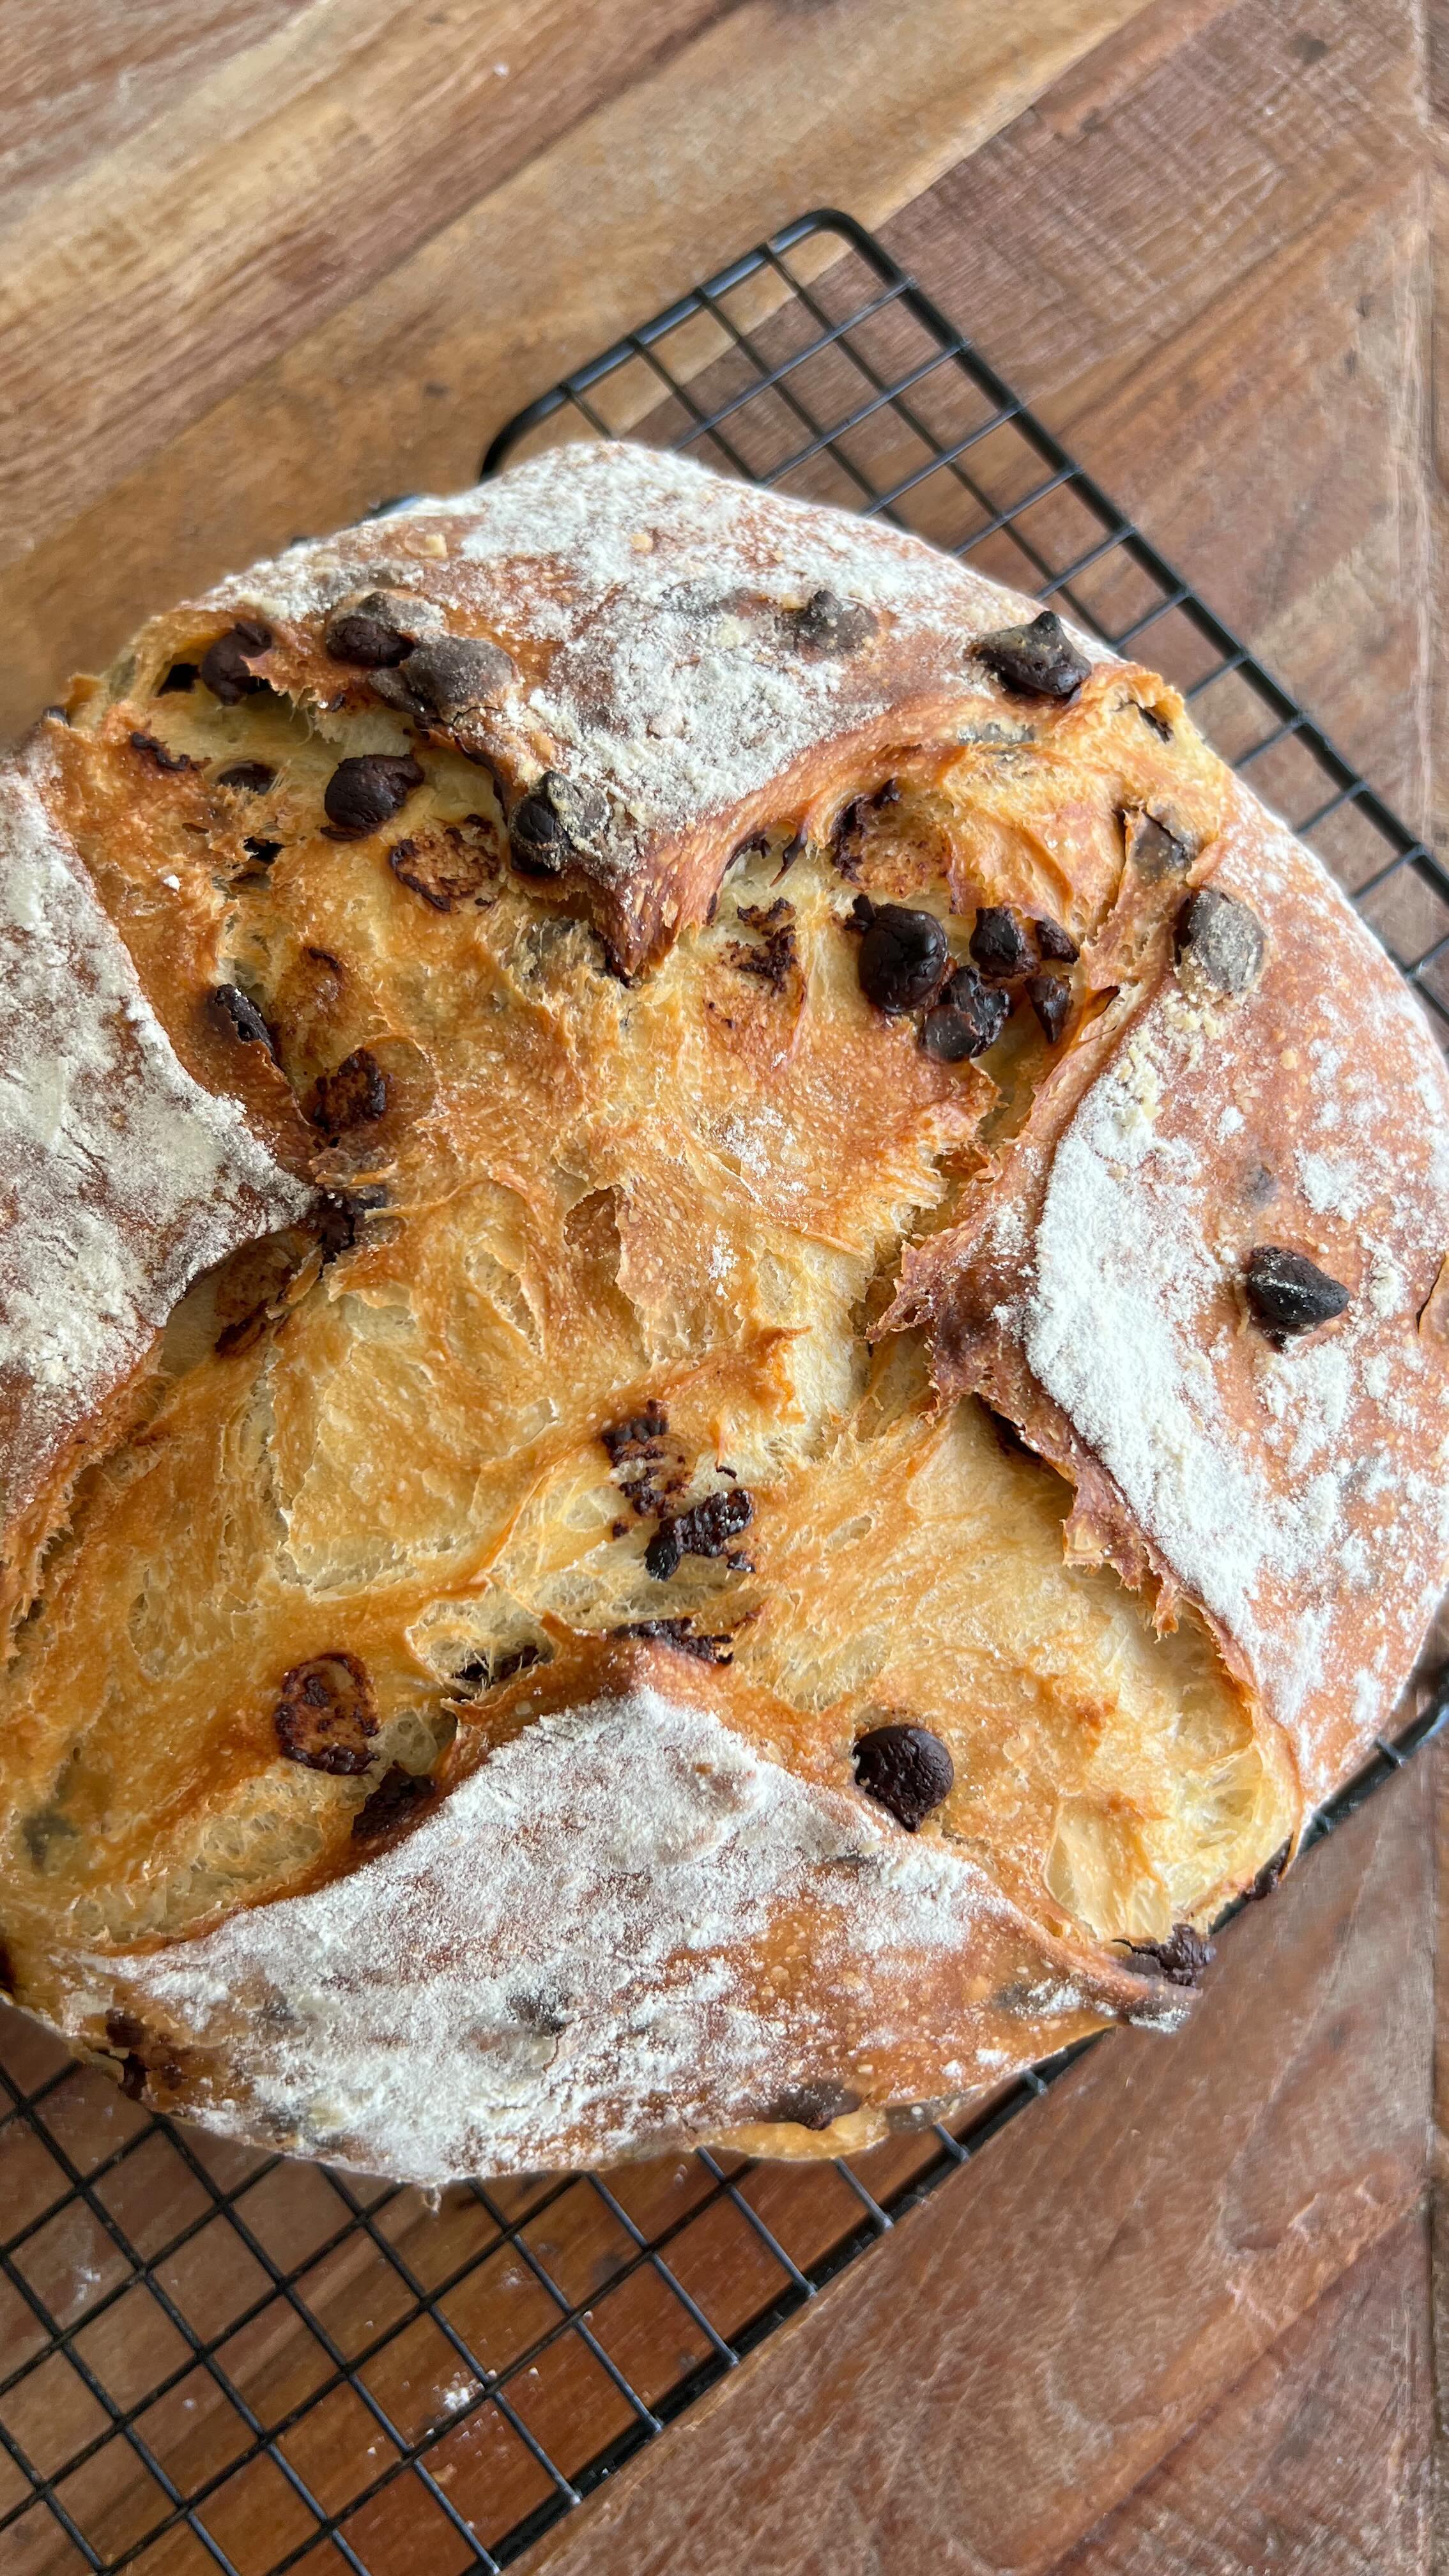 Comment RECIPE LINKS if you’d like the link for the full written recipe for this Chocolate Chip Bread sent direct to you